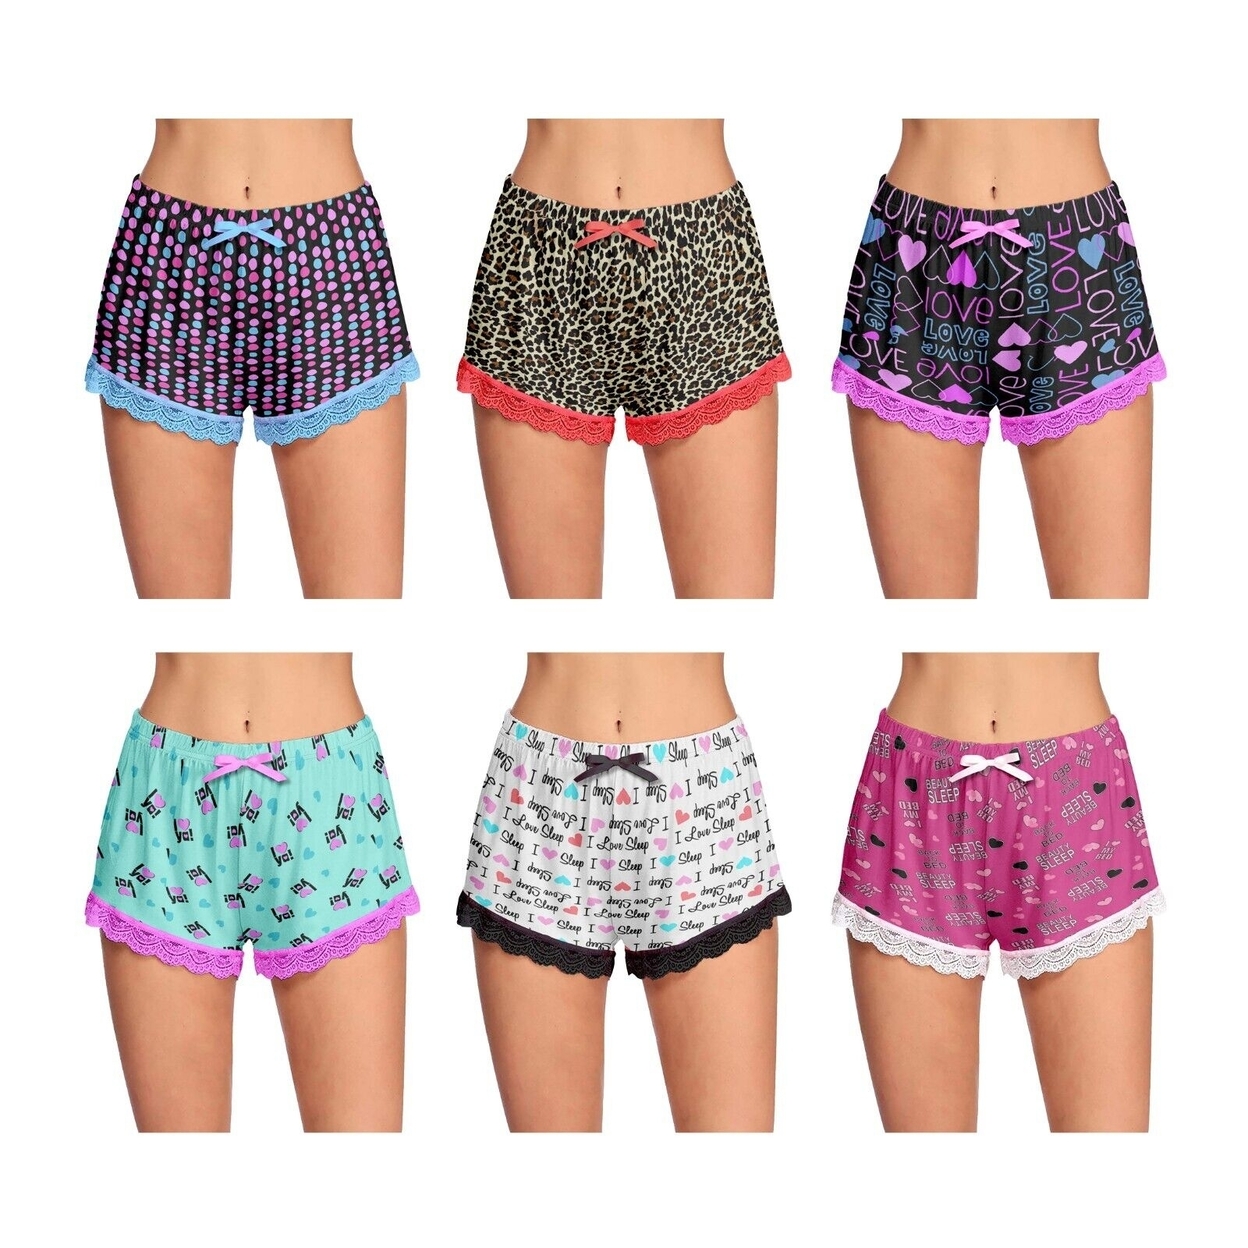 Multi-Pack: Women's Ultra-Soft Cozy Fun Printed Lace Trim Pajama Lounge Shorts - 1-pack, Small, Shapes